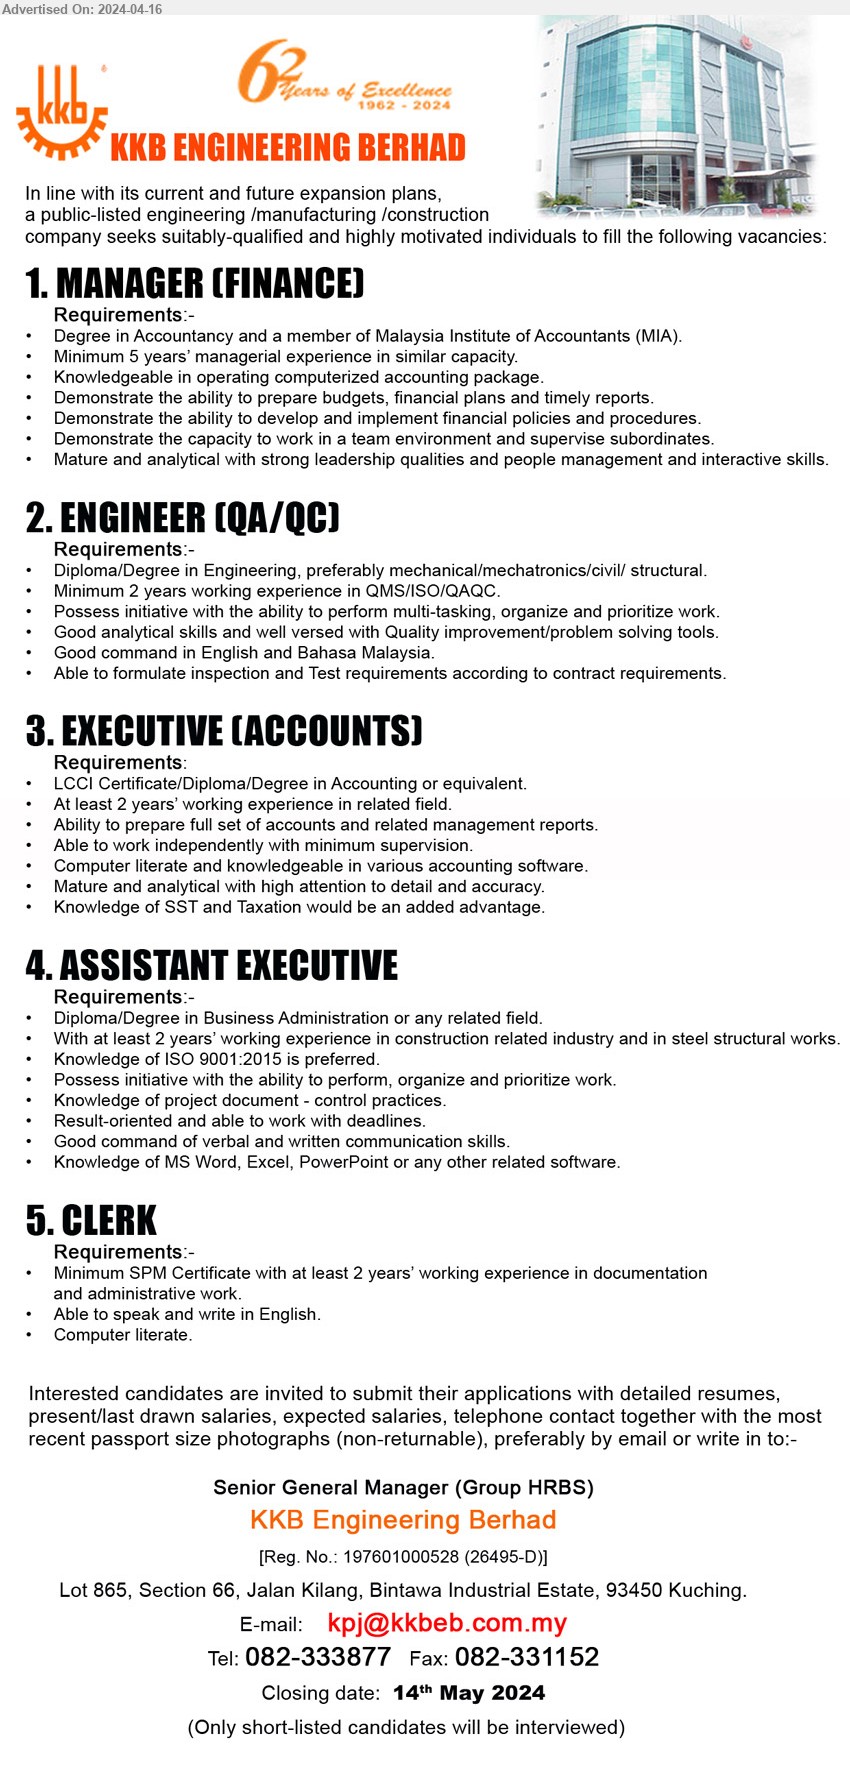 KKB ENGINEERING BERHAD - 1. MANAGER (FINANCE) (Kuching), Degree in Accountancy and a member of Malaysia Institute of Accountants (MIA).,...
2. ENGINEER (QA/QC) (Kuching), Diploma/Degree in Engineering, preferably Mechanical / Mechatronics / Civil/ Structural.,...
3. EXECUTIVE (ACCOUNTS) (Kuching), LCCI Certificate/Diploma/Degree in Accounting,...
4. ASSISTANT EXECUTIVE  (Kuching), Diploma/Degree in Business Administration,...
5. CLERK (Kuching), SPM Certificate with at least 2 years’ working experience in documentation,...
Call 082-333877 / Email resume to ...
